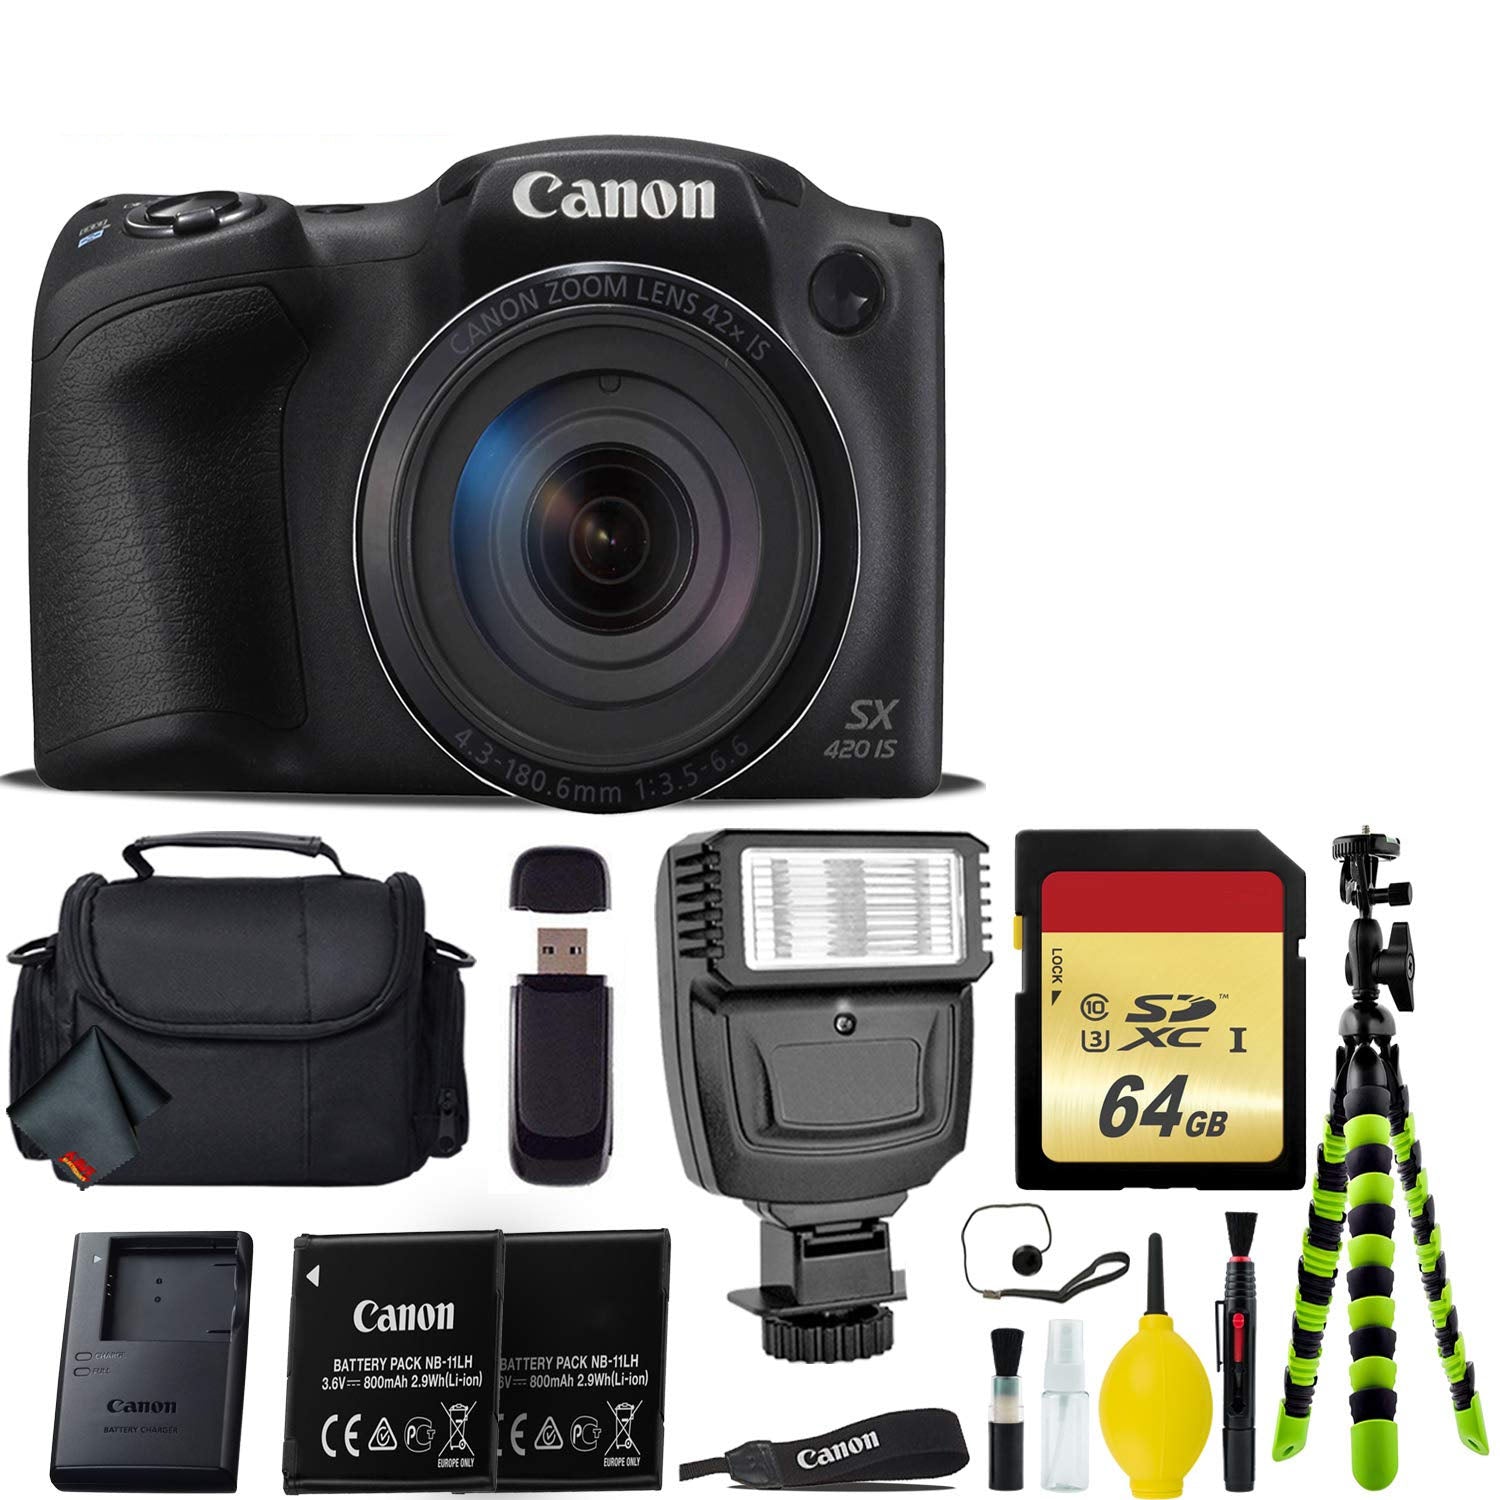 Canon PowerShot SX420 is Digital Point and Shoot Camera + Extra Battery + Digital Flash + Camera Case + 64GB Class 10 Card Professional Bundle